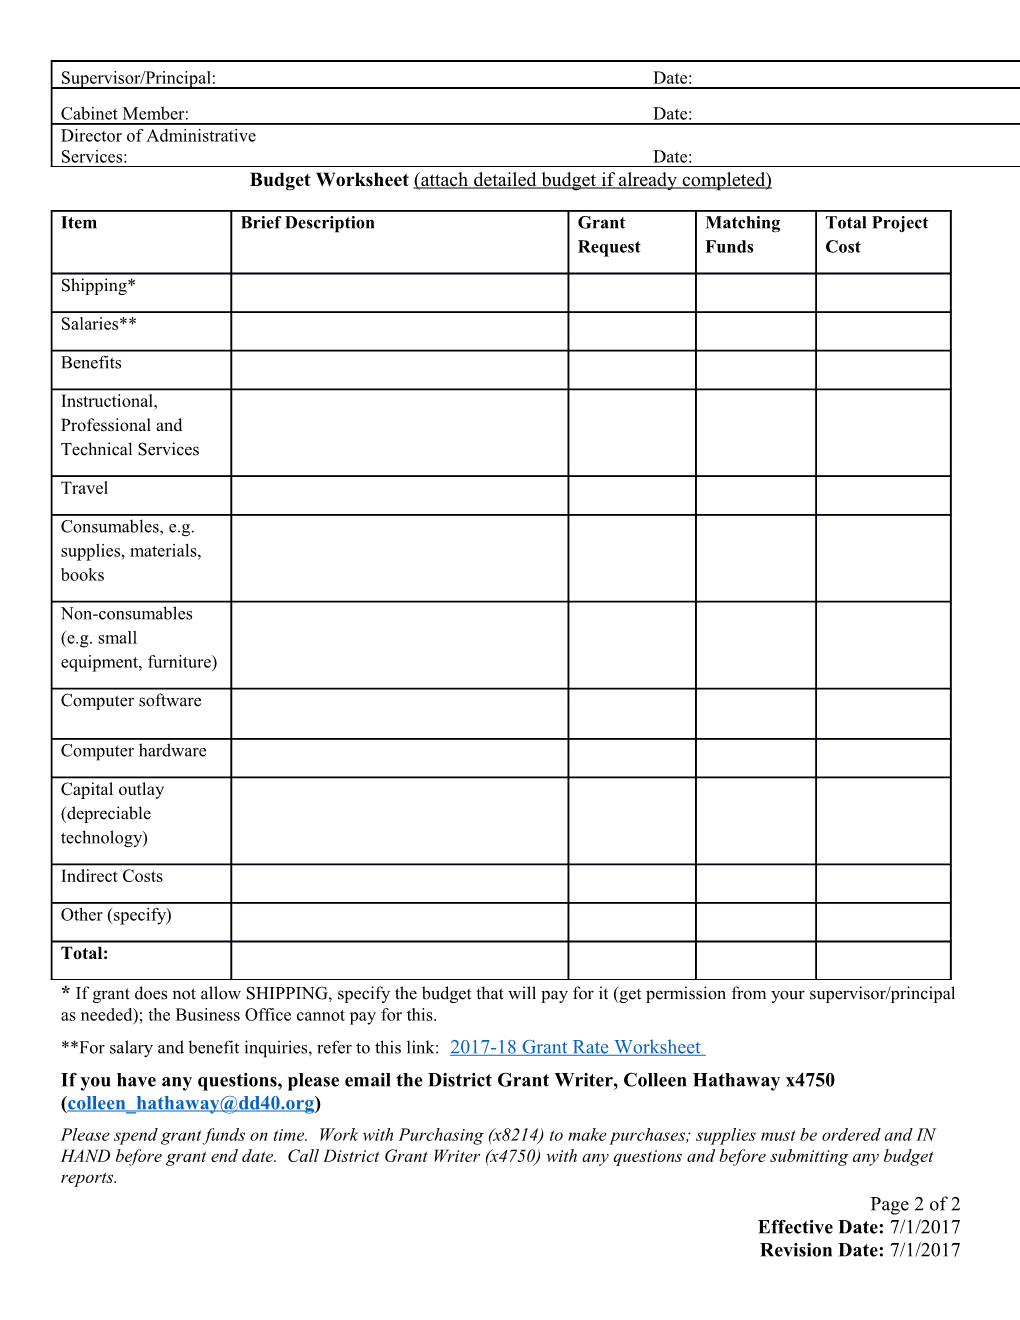 Budget Worksheet (Attach Detailed Budget If Already Completed)